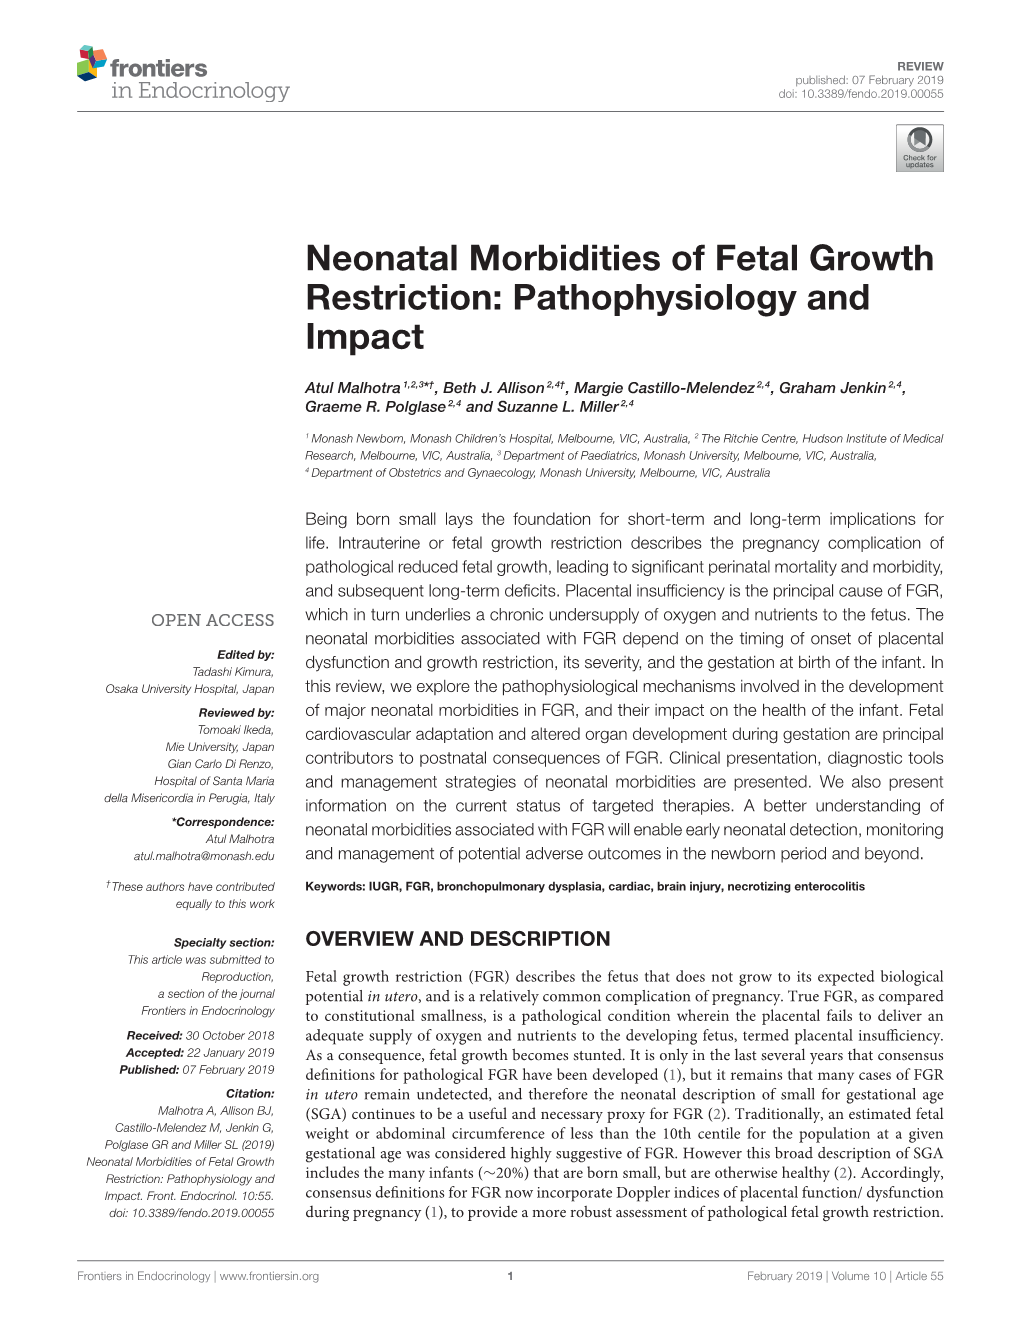 Neonatal Morbidities of Fetal Growth Restriction: Pathophysiology and Impact